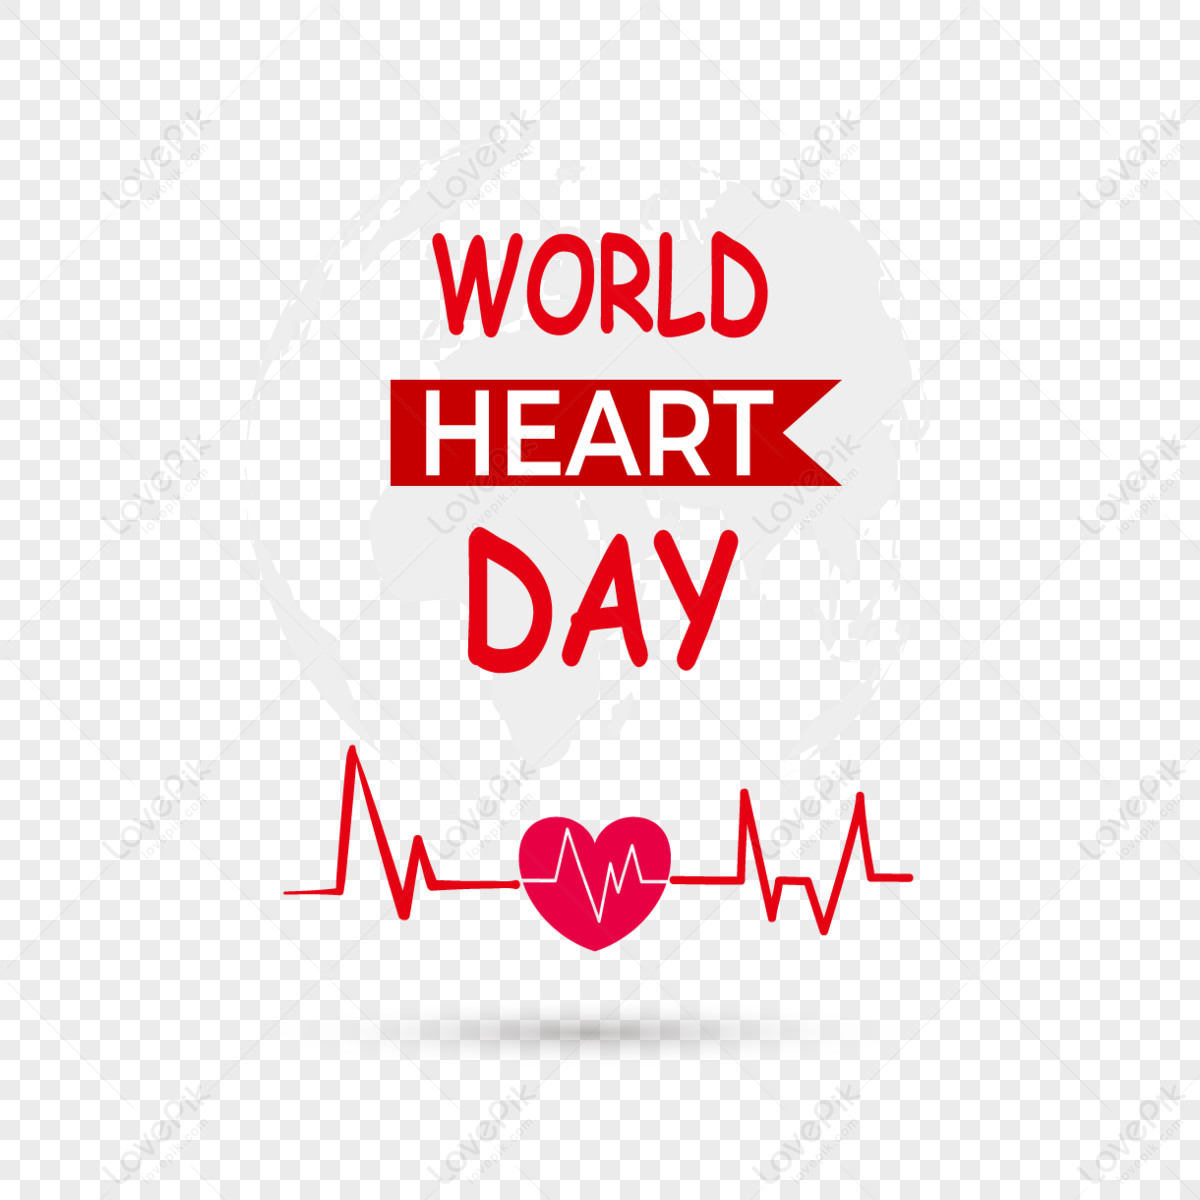 World Heart Day Images - Free Download on Freepik